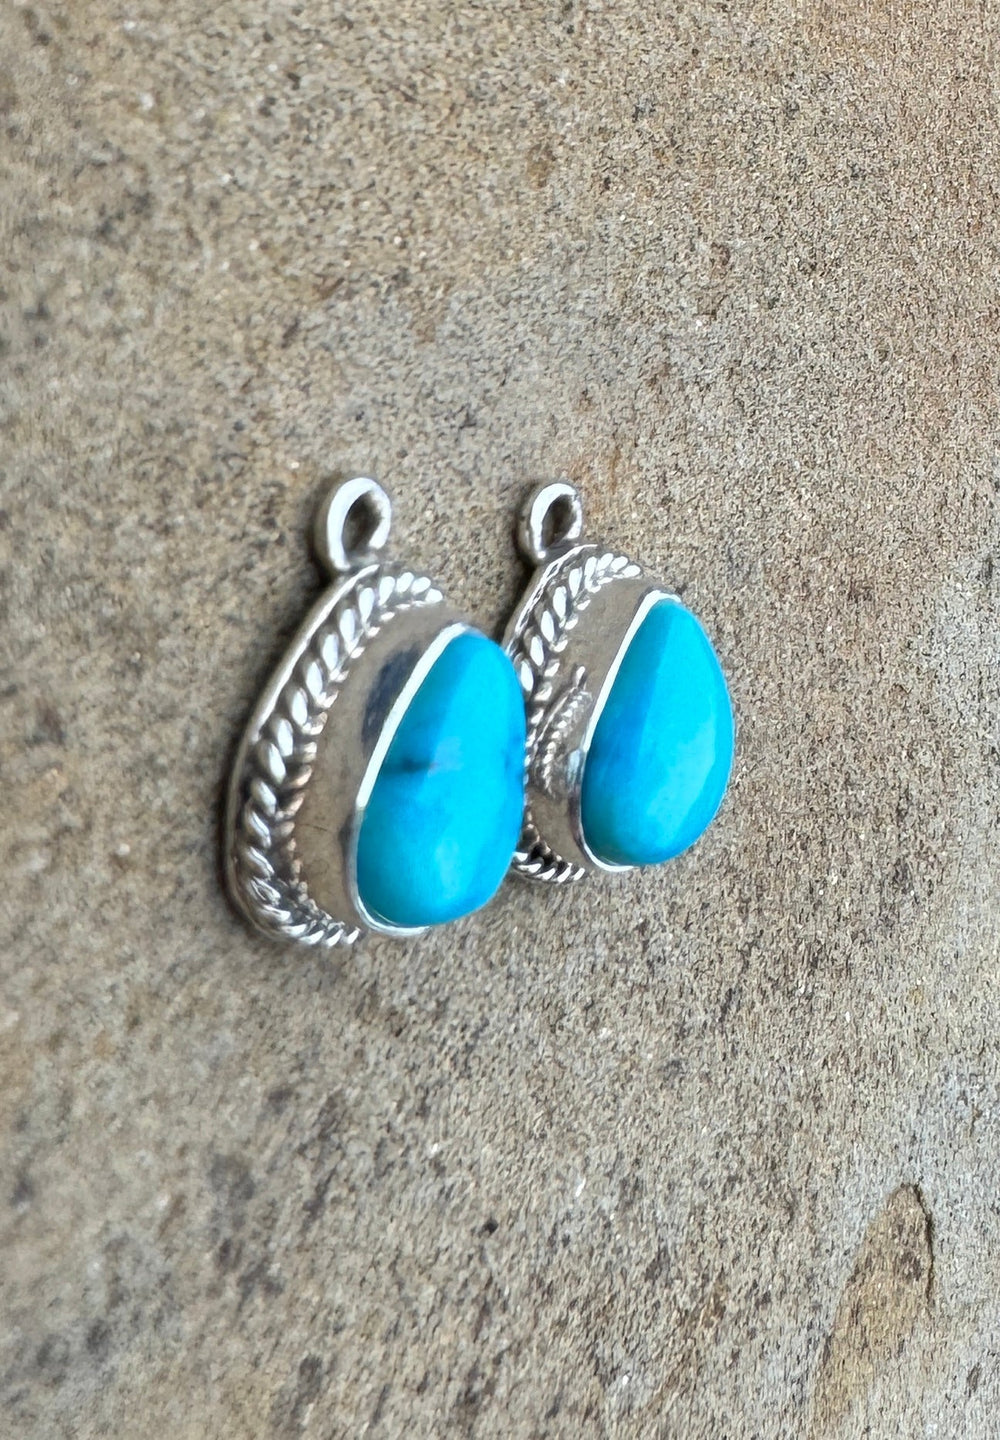 Sterling Silver and Turquoise Charm/Earring Pair 12x18mm